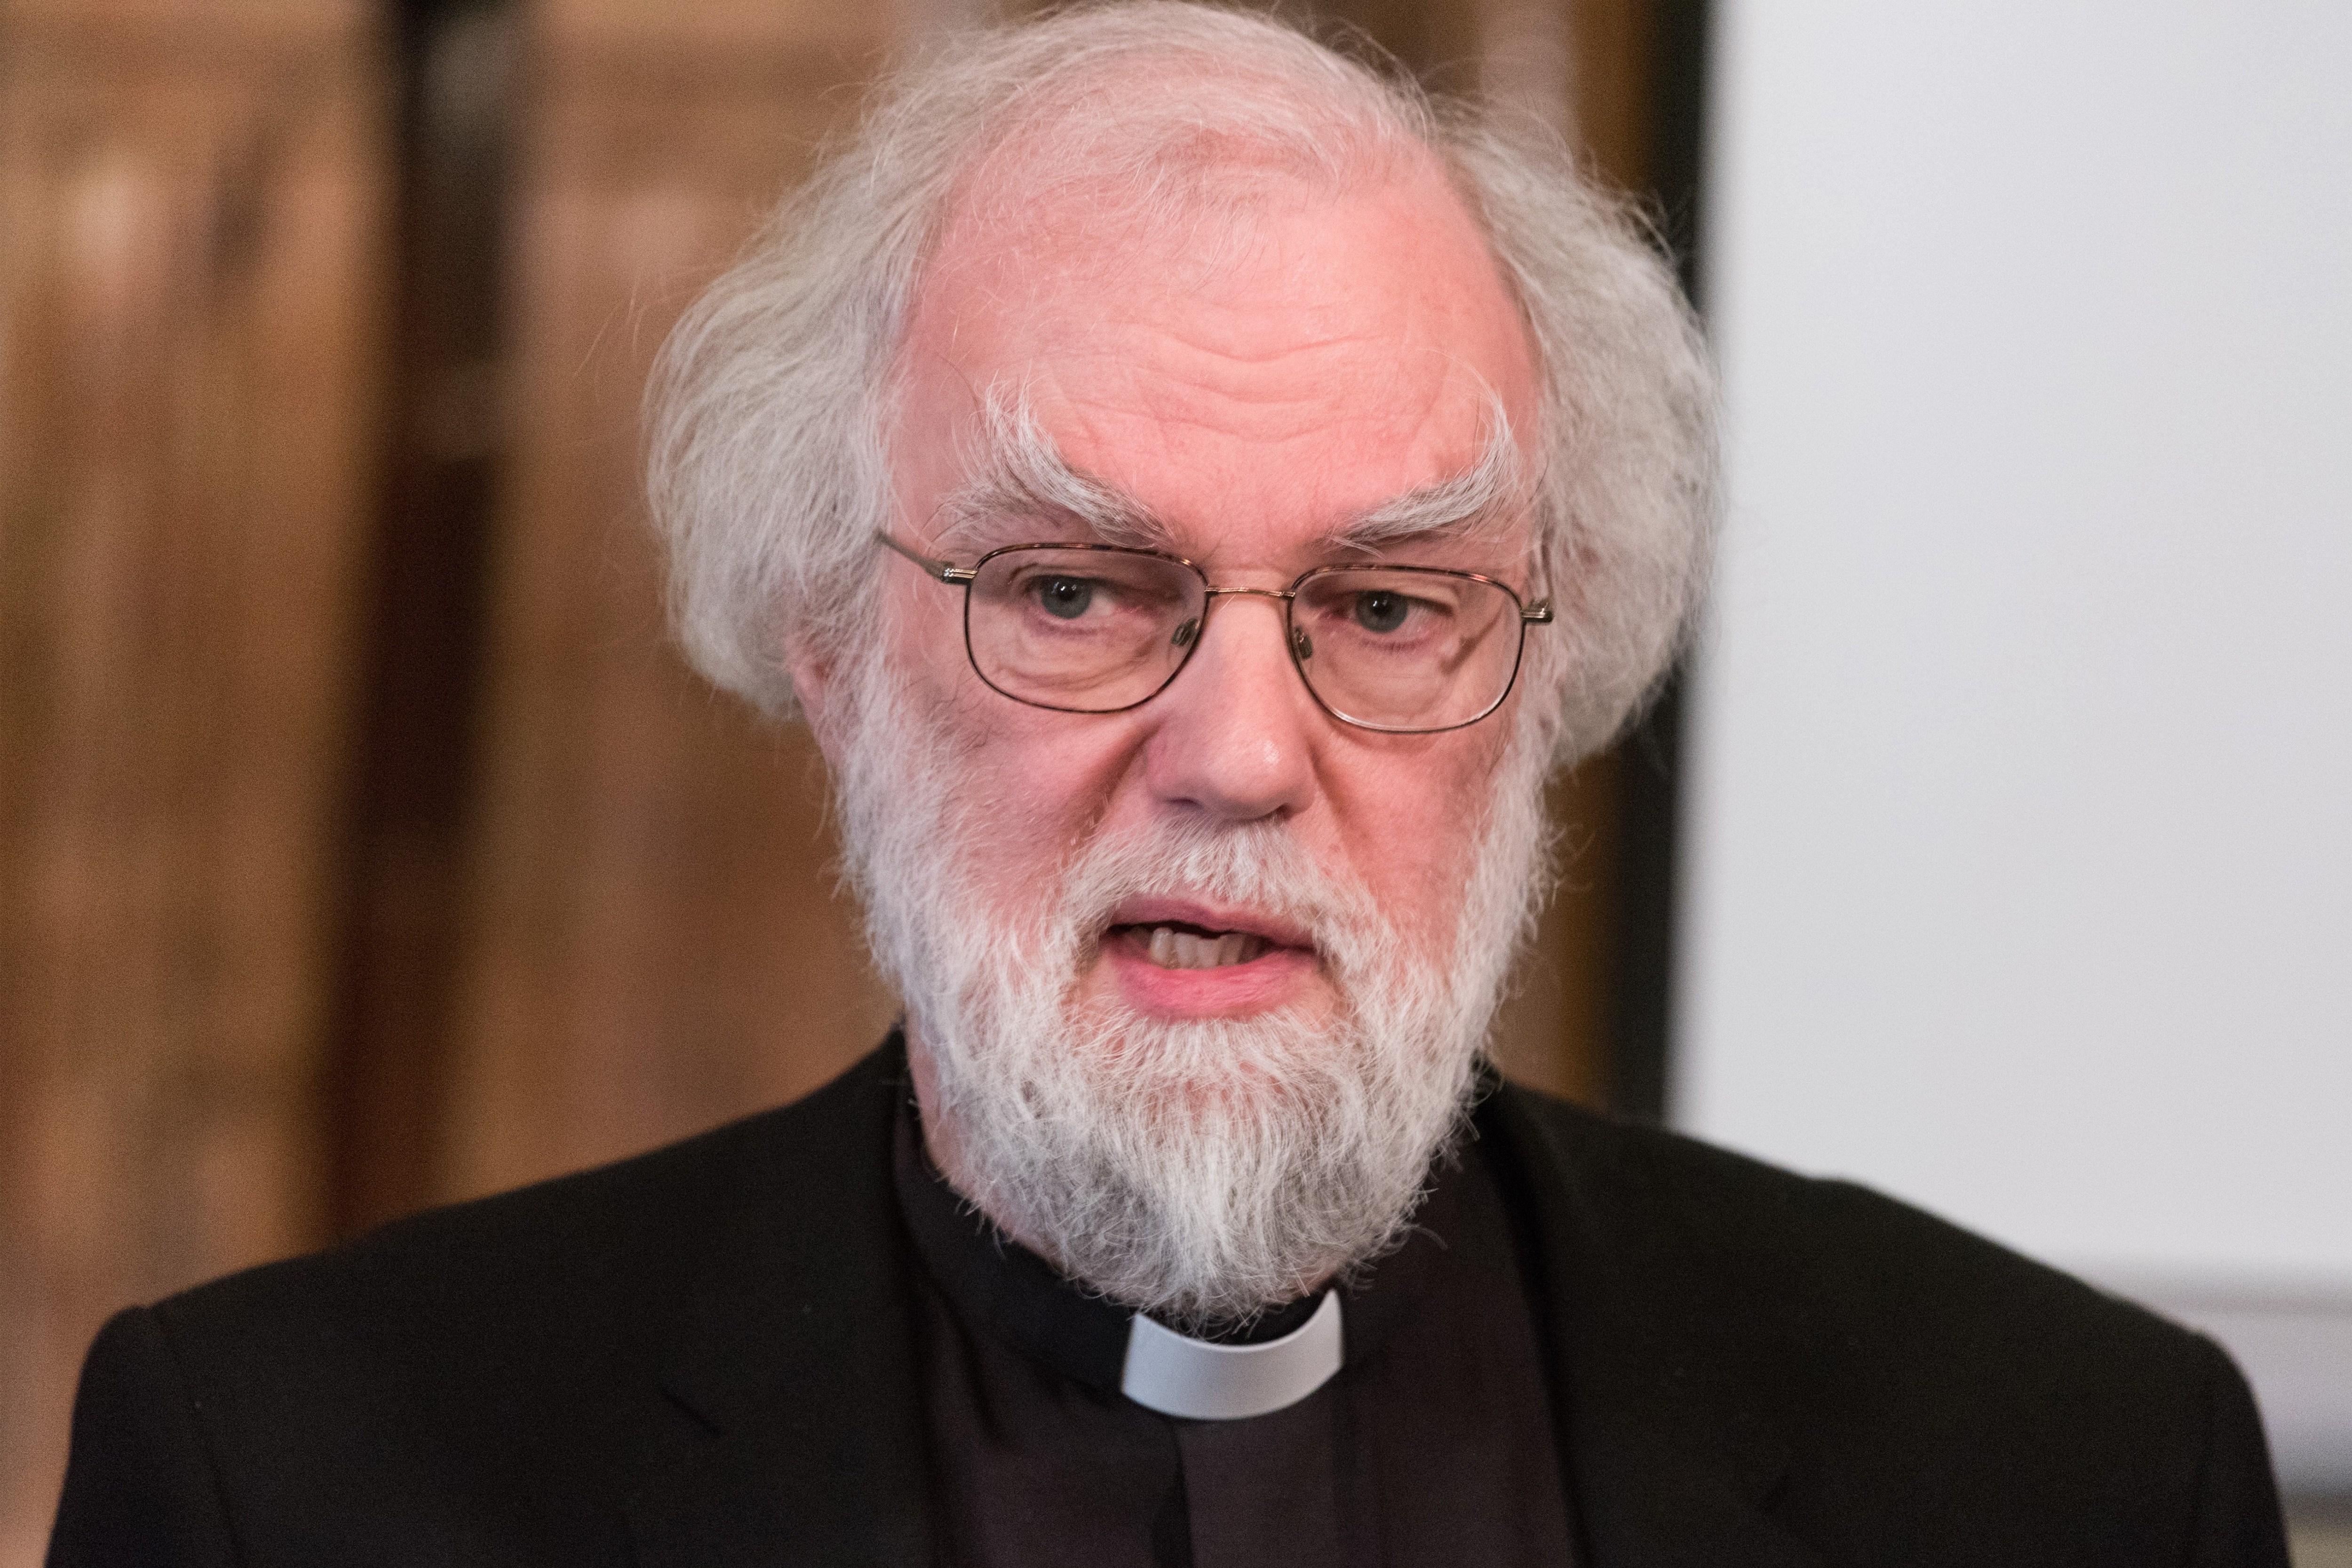 a man with glasses and a beard is wearing a clergy collar